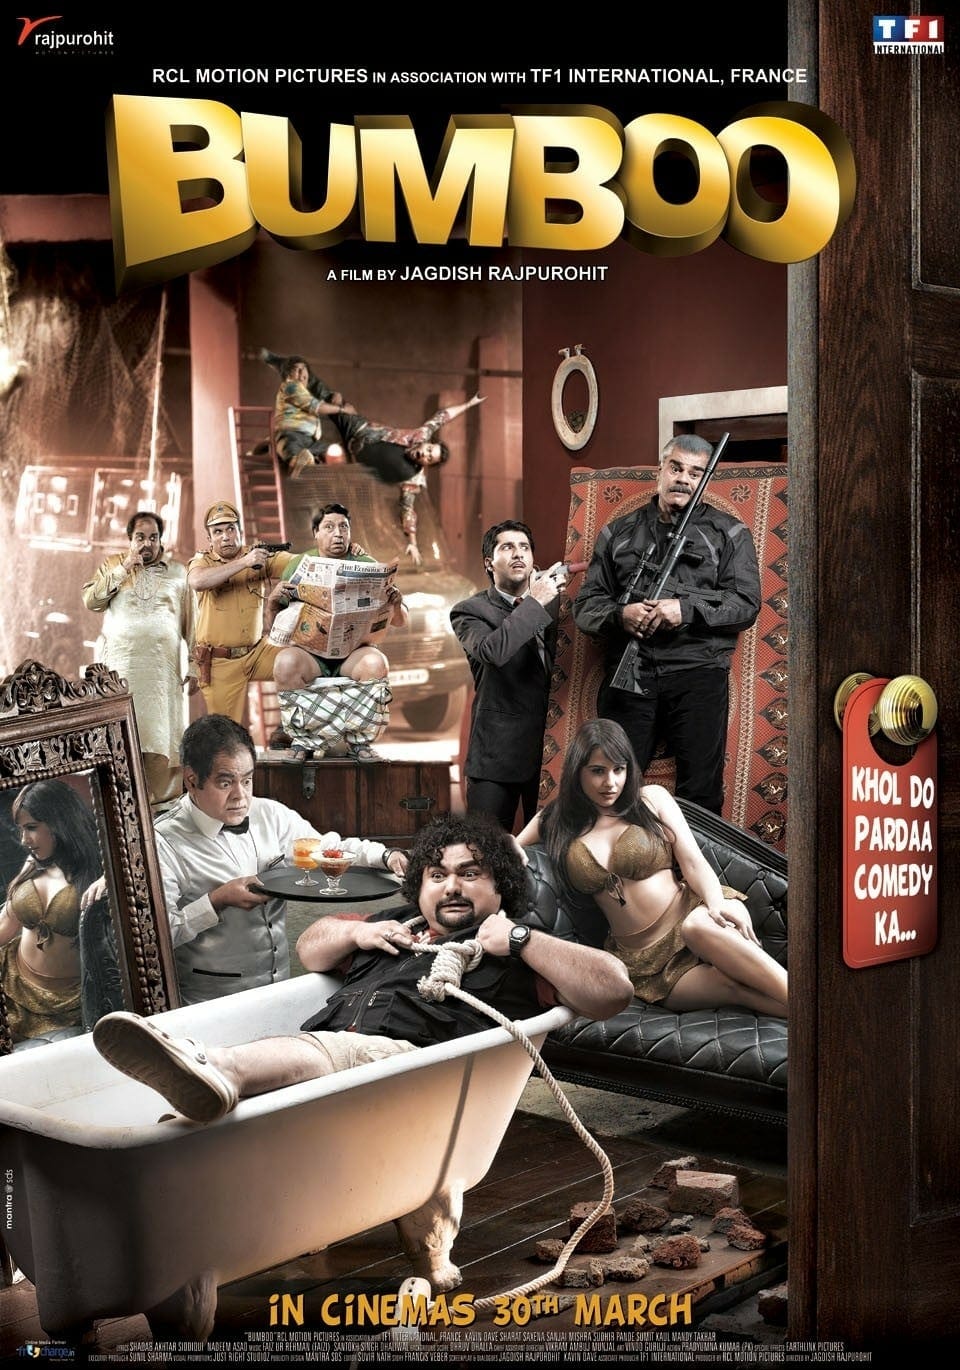 Poster for the movie "Bumboo"